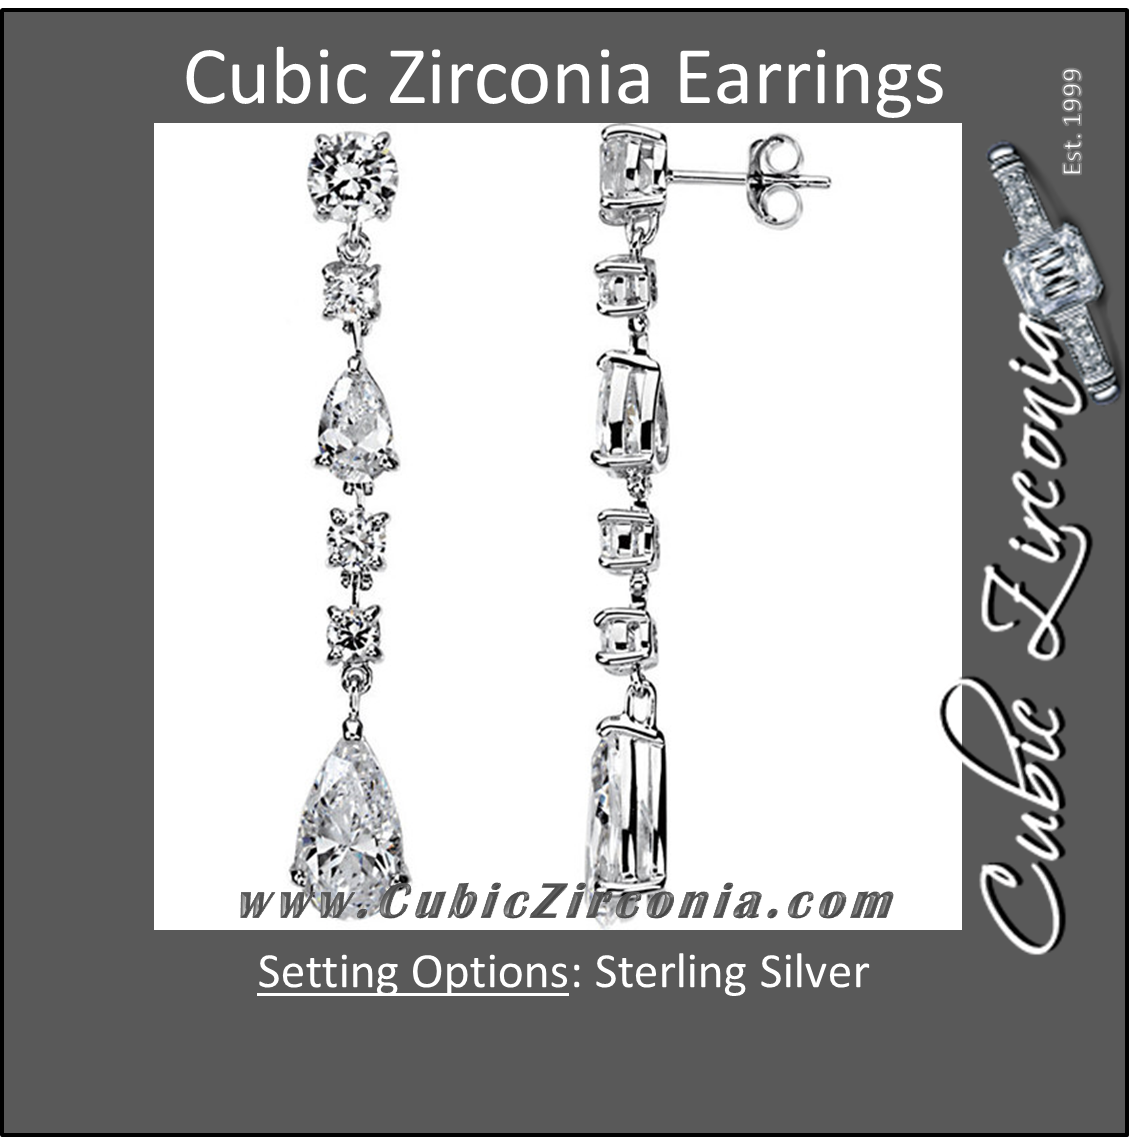 Cubic Zirconia Earrings- Fancy Dangle Sterling Silver Earring Set with Pear and Round Cut CZ